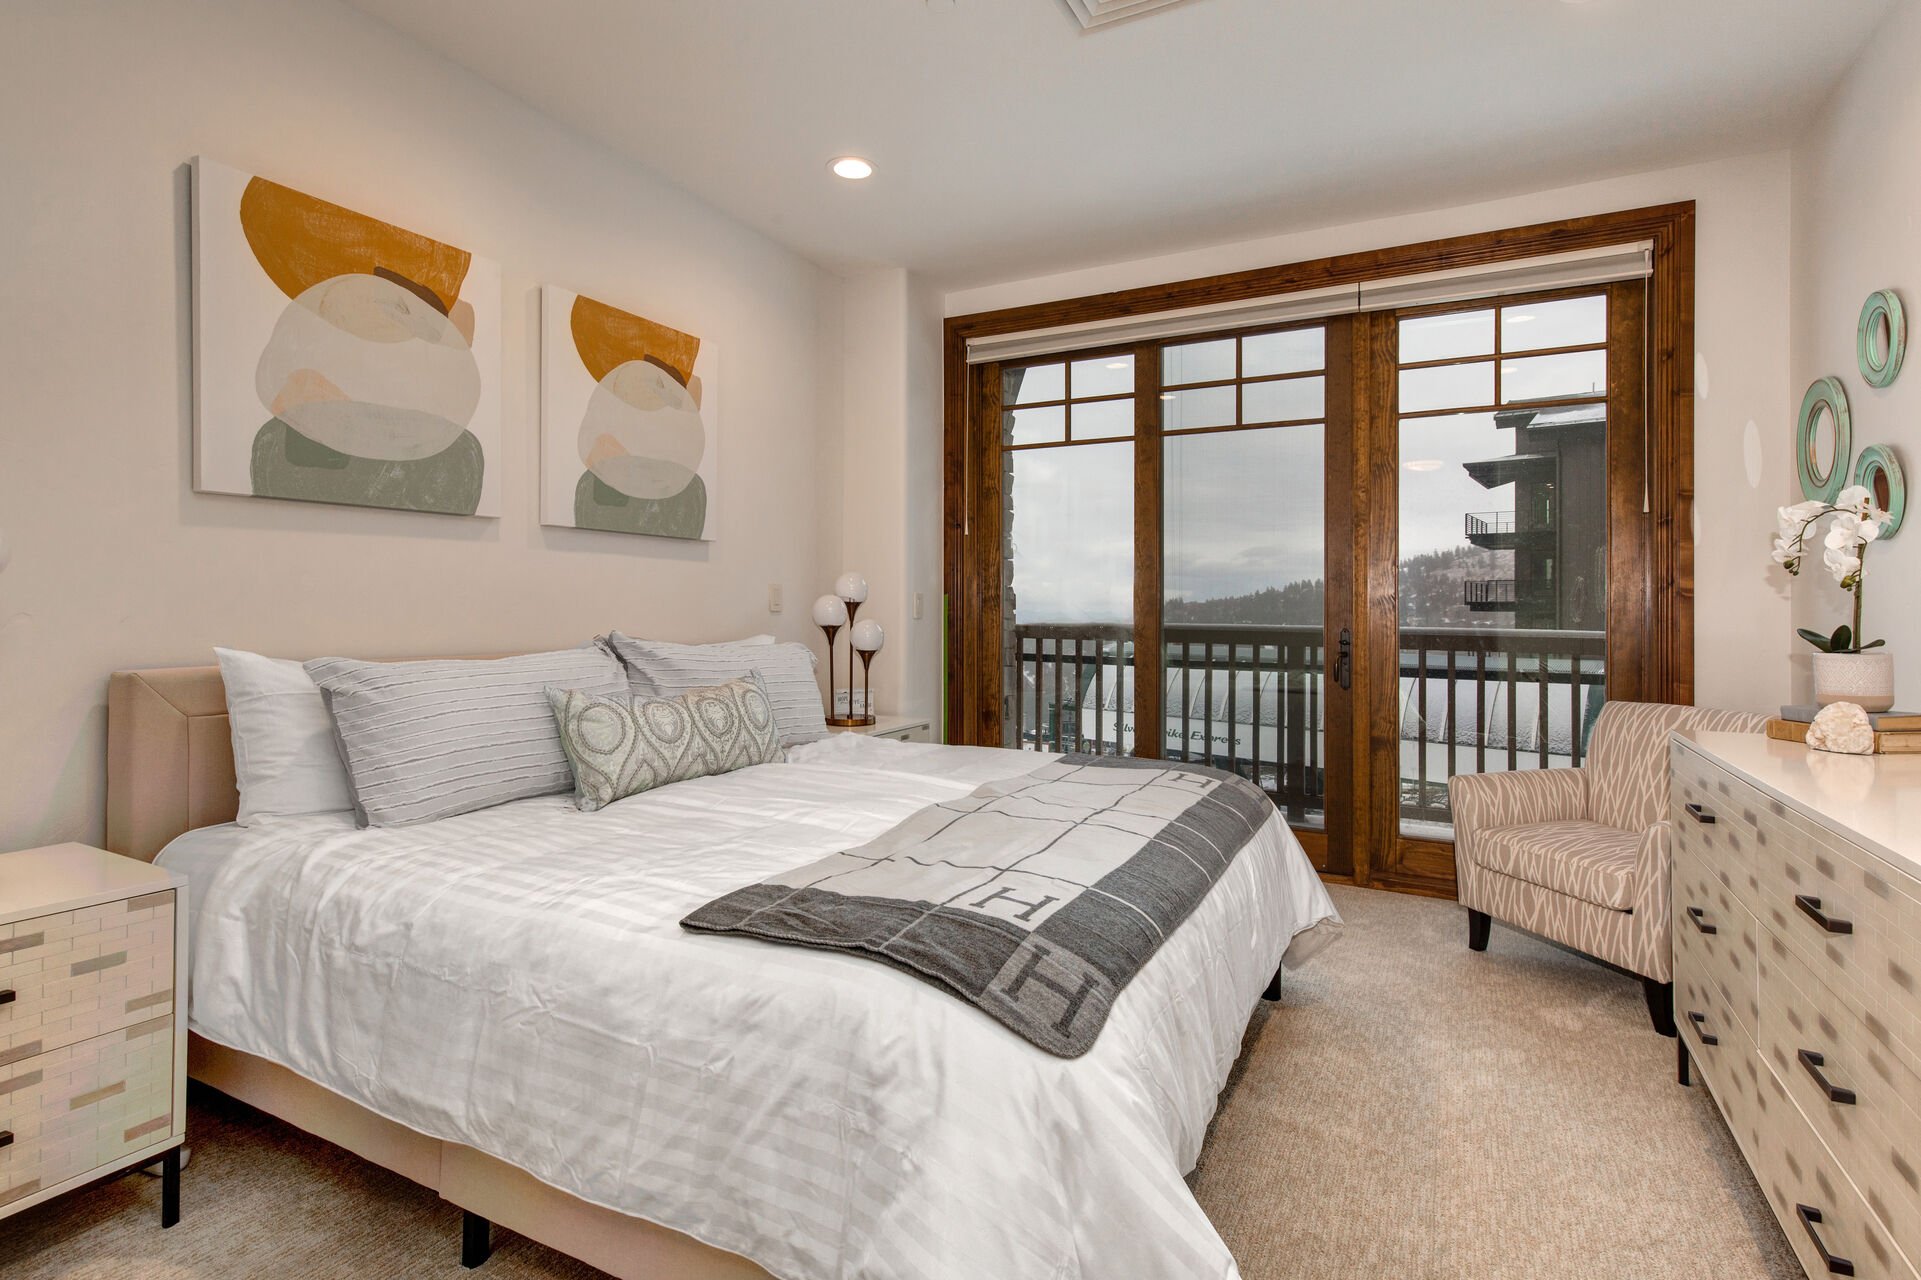 Master Bedroom 2 with a King Bed, Smart TV, and Balcony Overlooking Silver Buck Ski Run